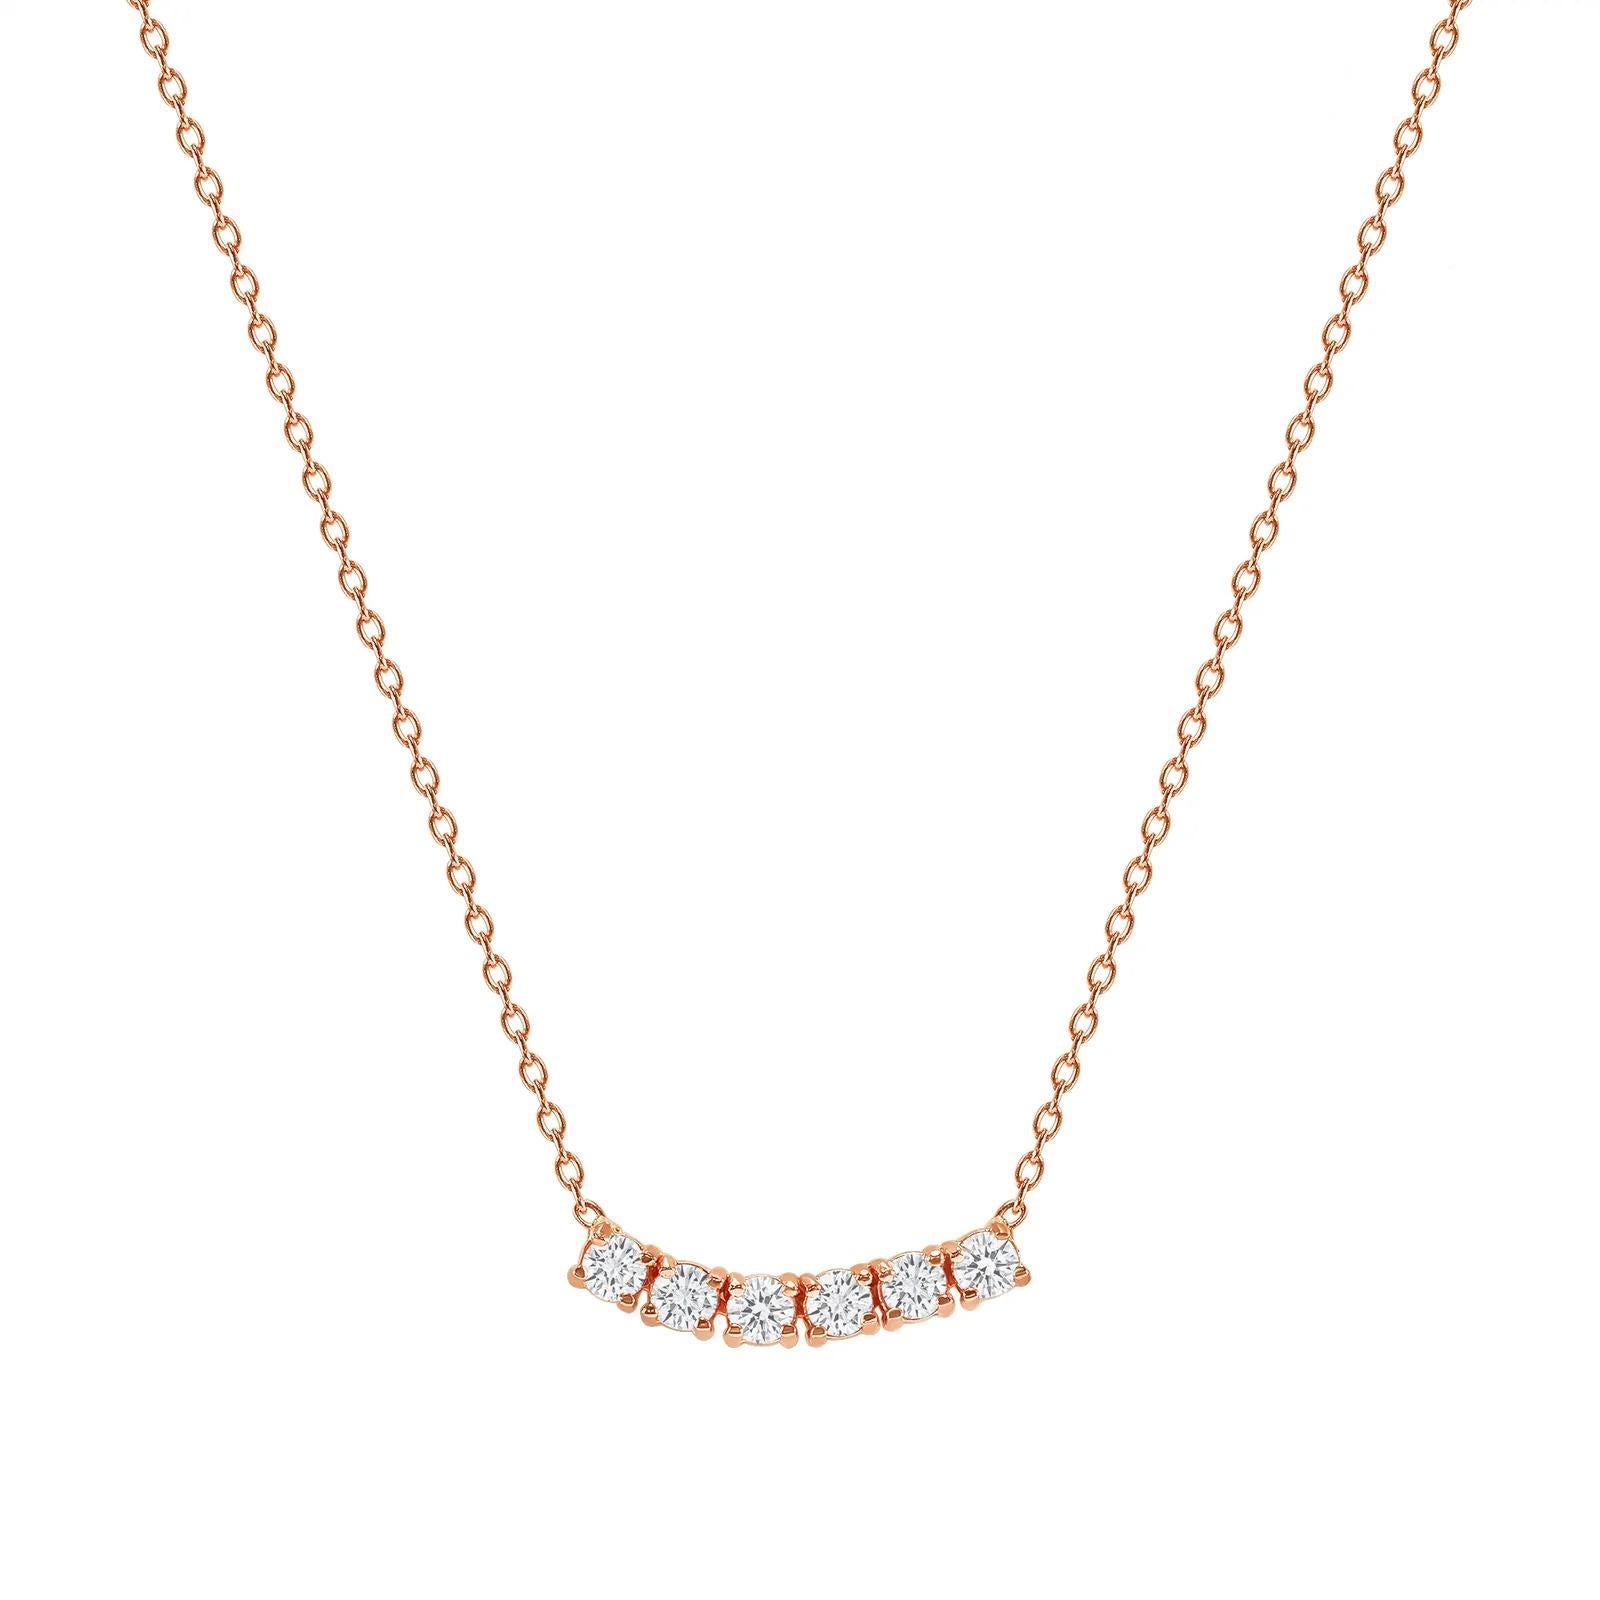 This petite, curved diamond necklace is crafted with gorgeous 14k gold set with six round diamonds.  

Gold: 14k 
Diamond Total Carats: 1.5 ct
Diamond Cut: Round (6 diamonds)
Diamond Clarity: VS
Diamond Color: F
Color: Rose Gold
Necklace Length: 20